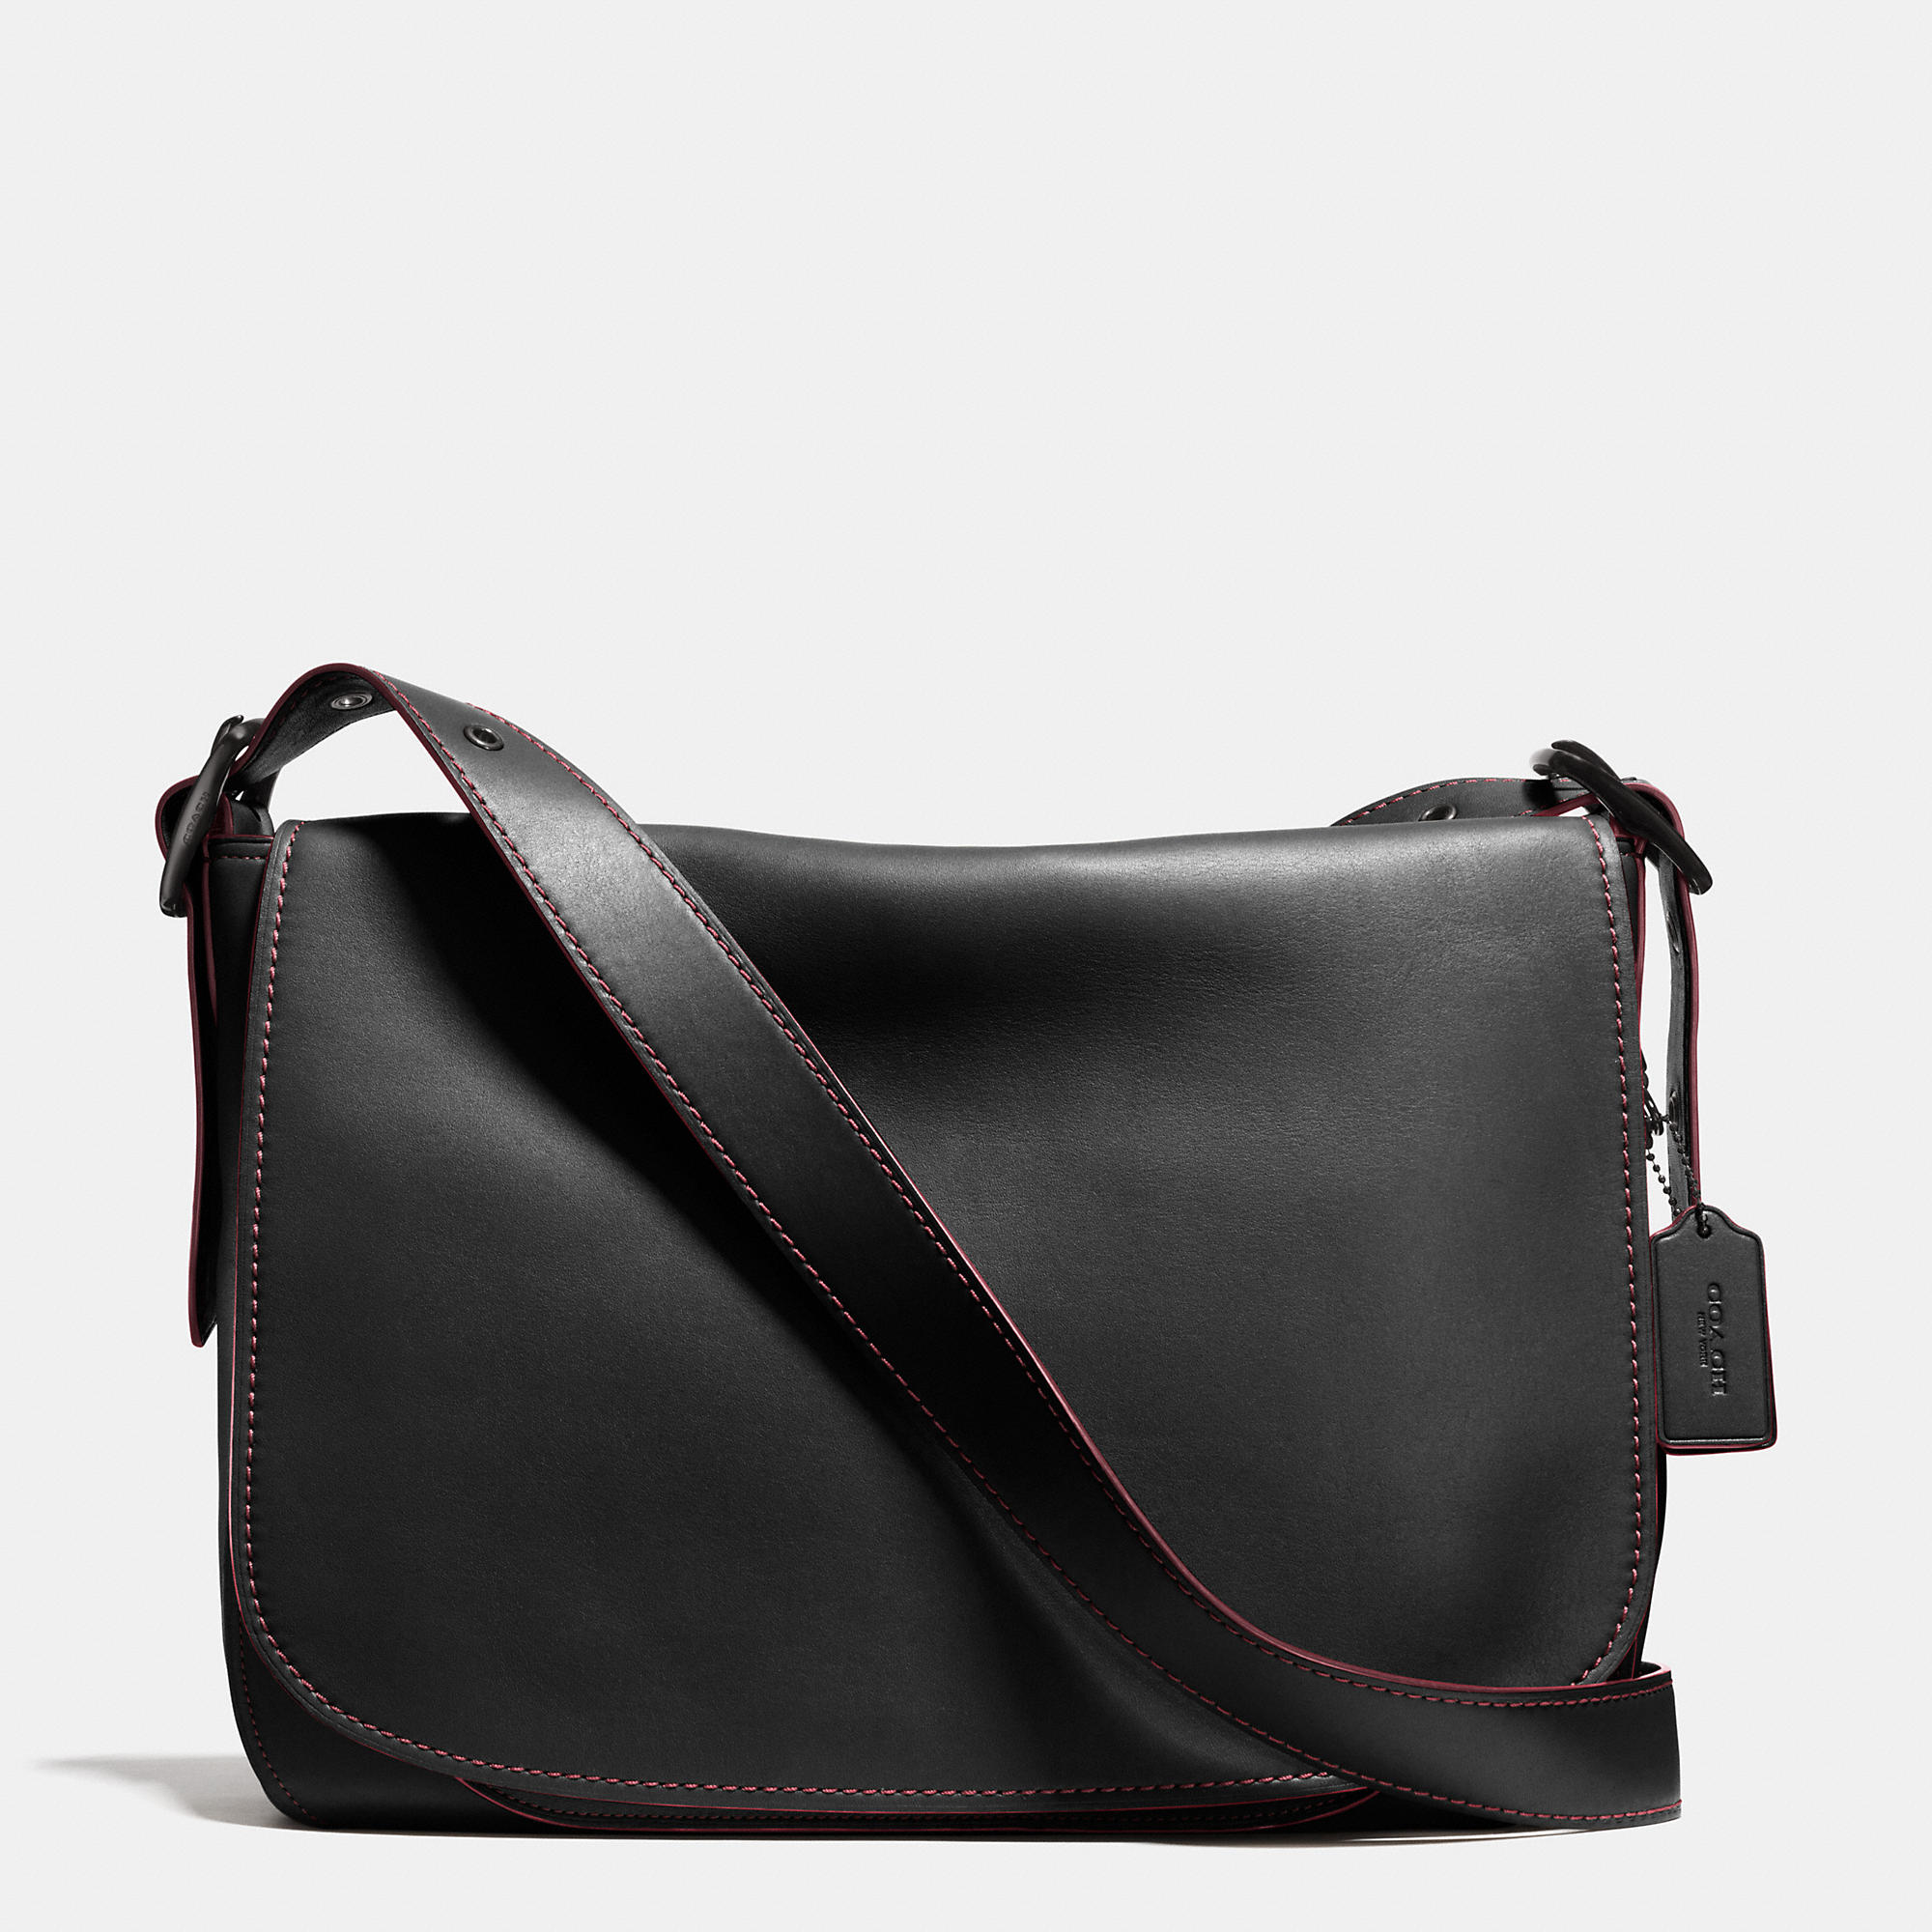 Lyst - COACH Saddle Bag Messenger 38 With Personalized Storypatch in Black